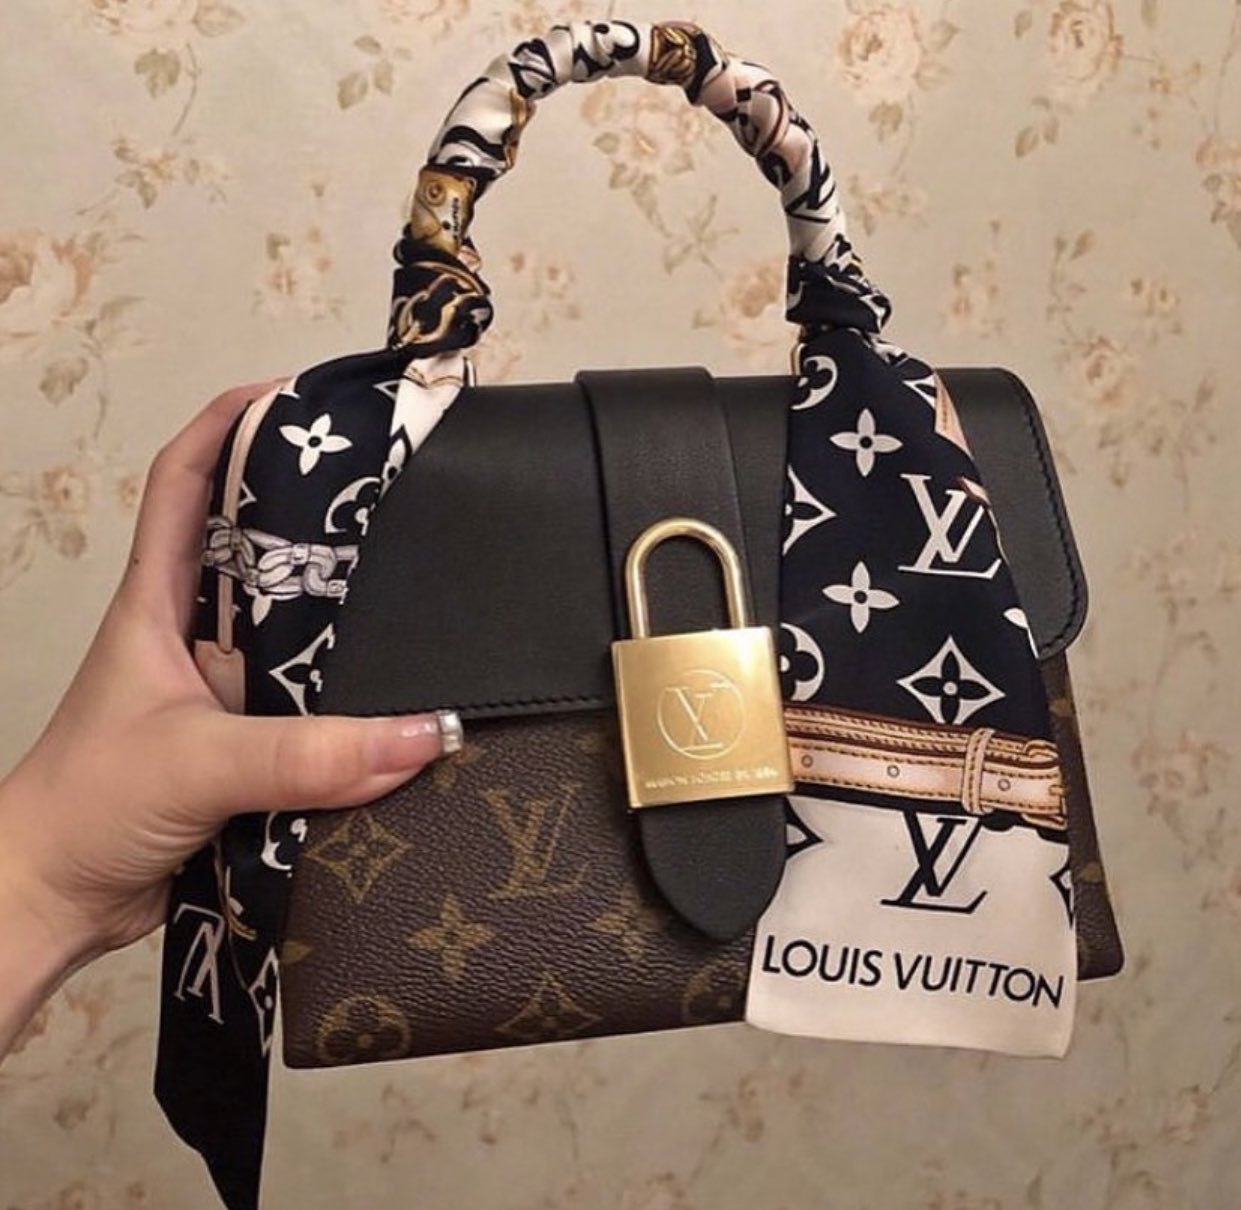 m ✨ on X: thinking of this louis vuitton bag